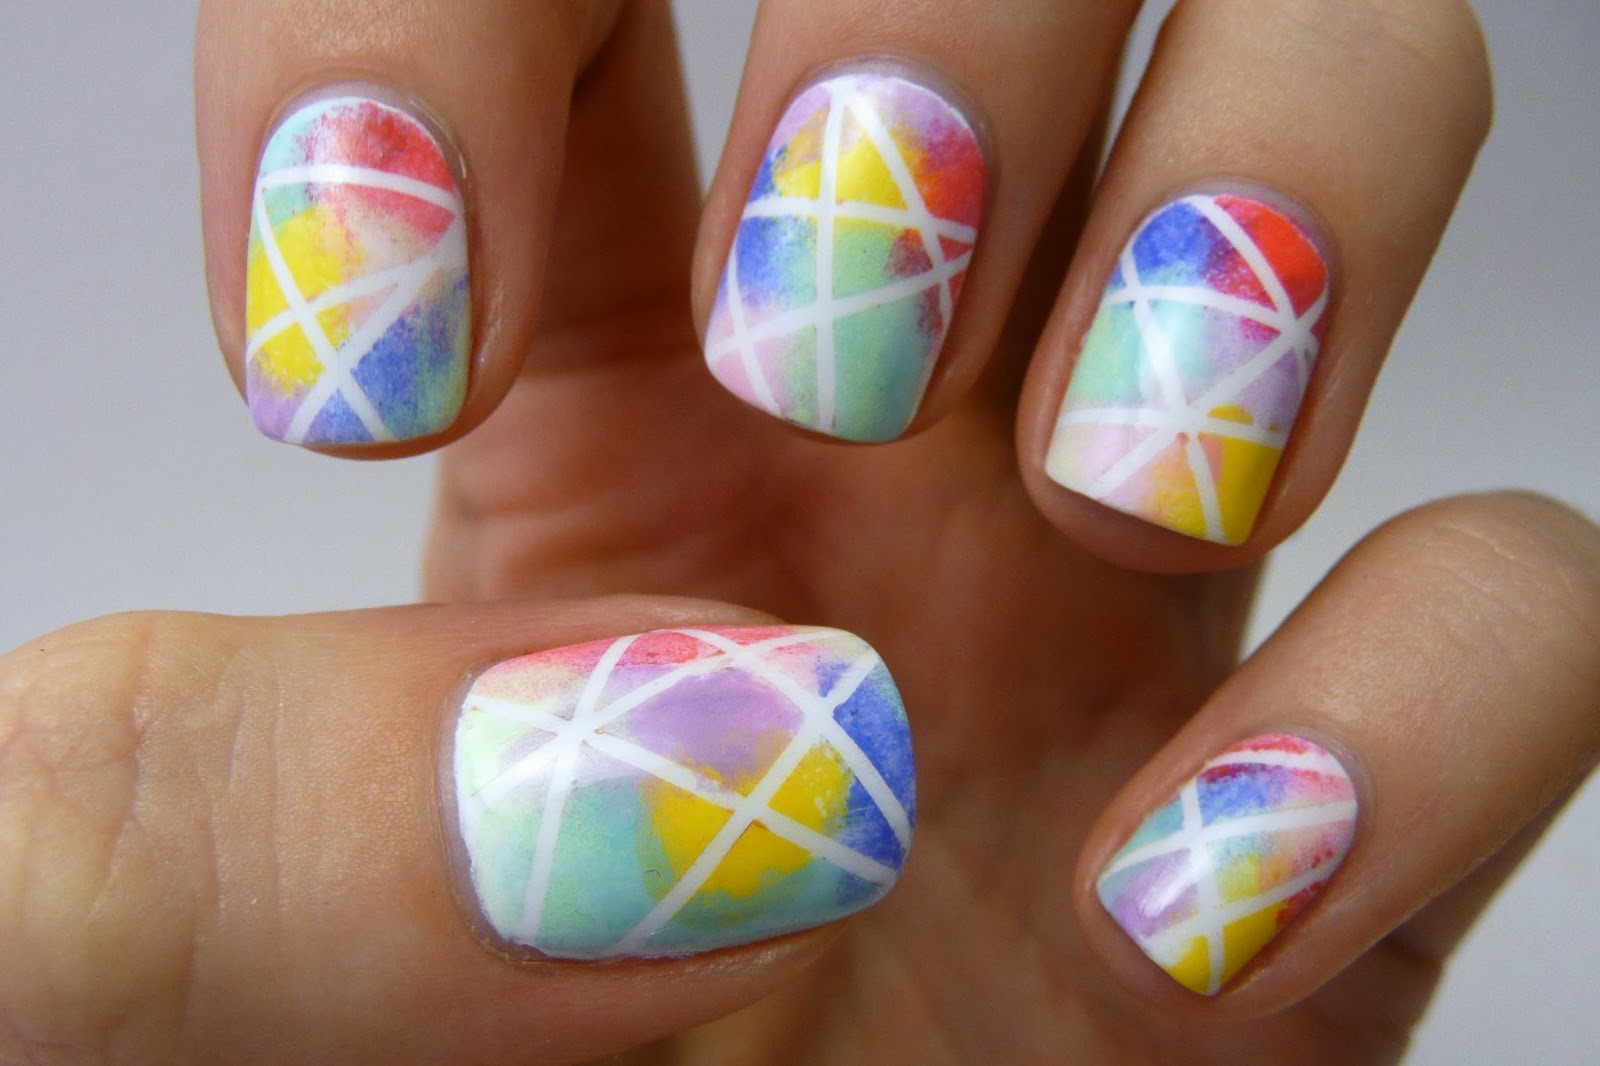 4. Striping Tape Nail Art Designs and Tutorials in the Philippines - wide 7